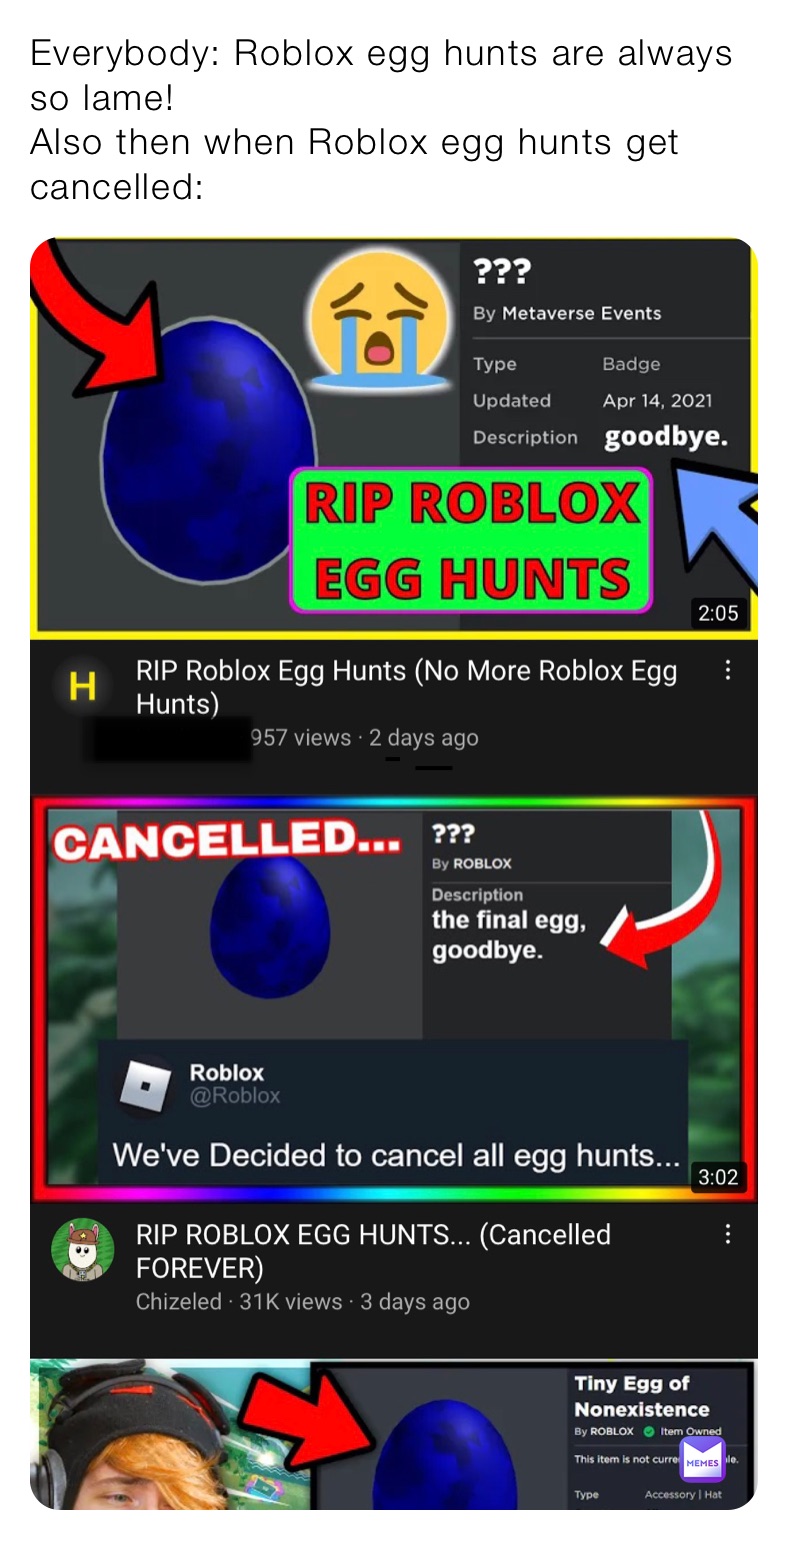 Everybody: Roblox egg hunts are always so lame!
Also then when Roblox egg hunts get cancelled: